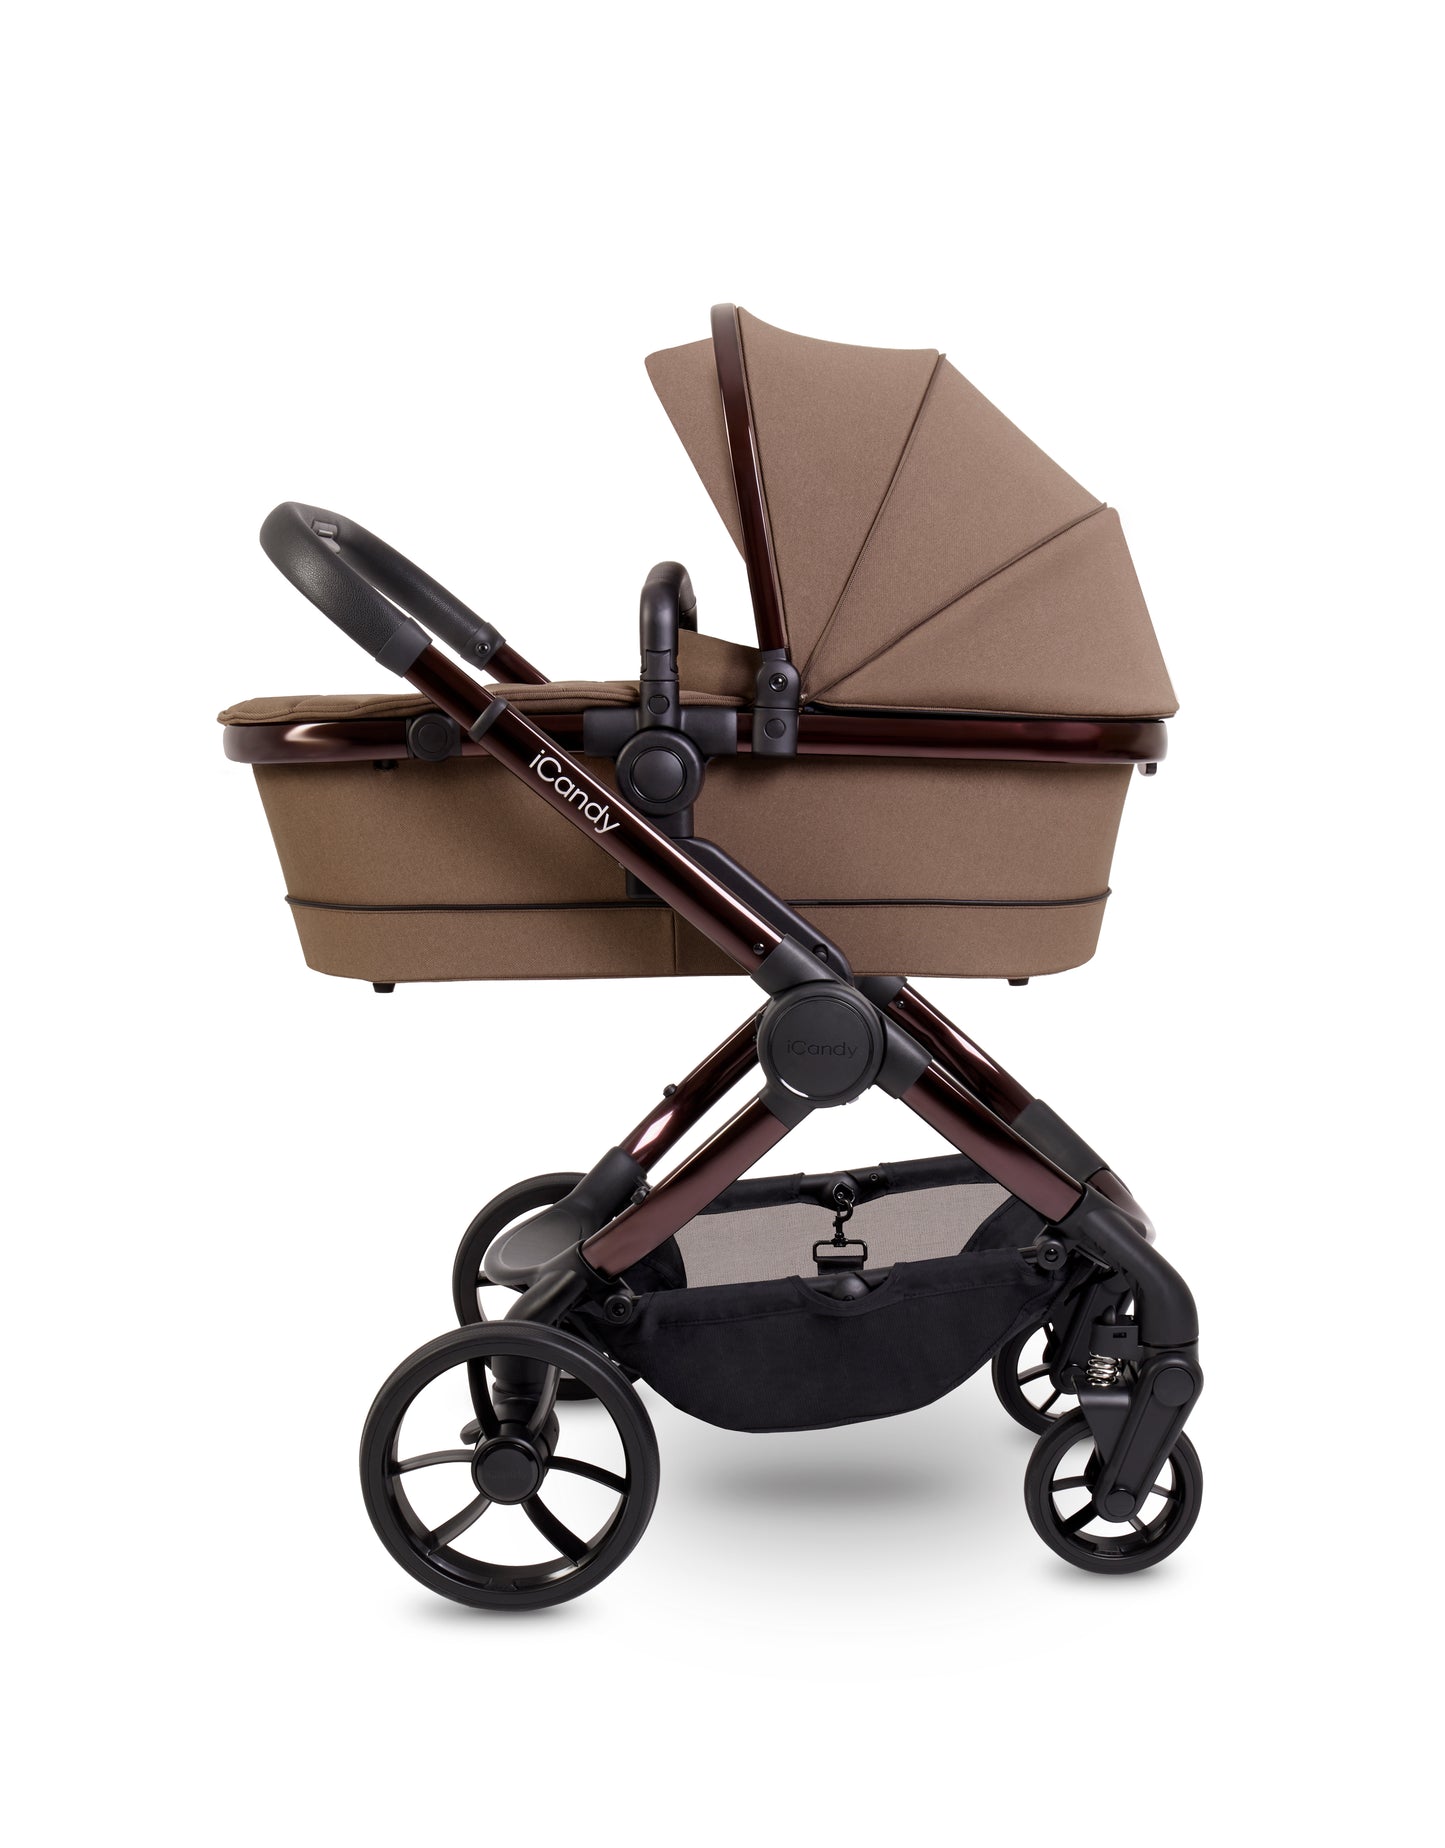 iCandy Peach 7 Pushchair & Maxi Cosi Pebble 360 PRO Travel System Bundle | Coco